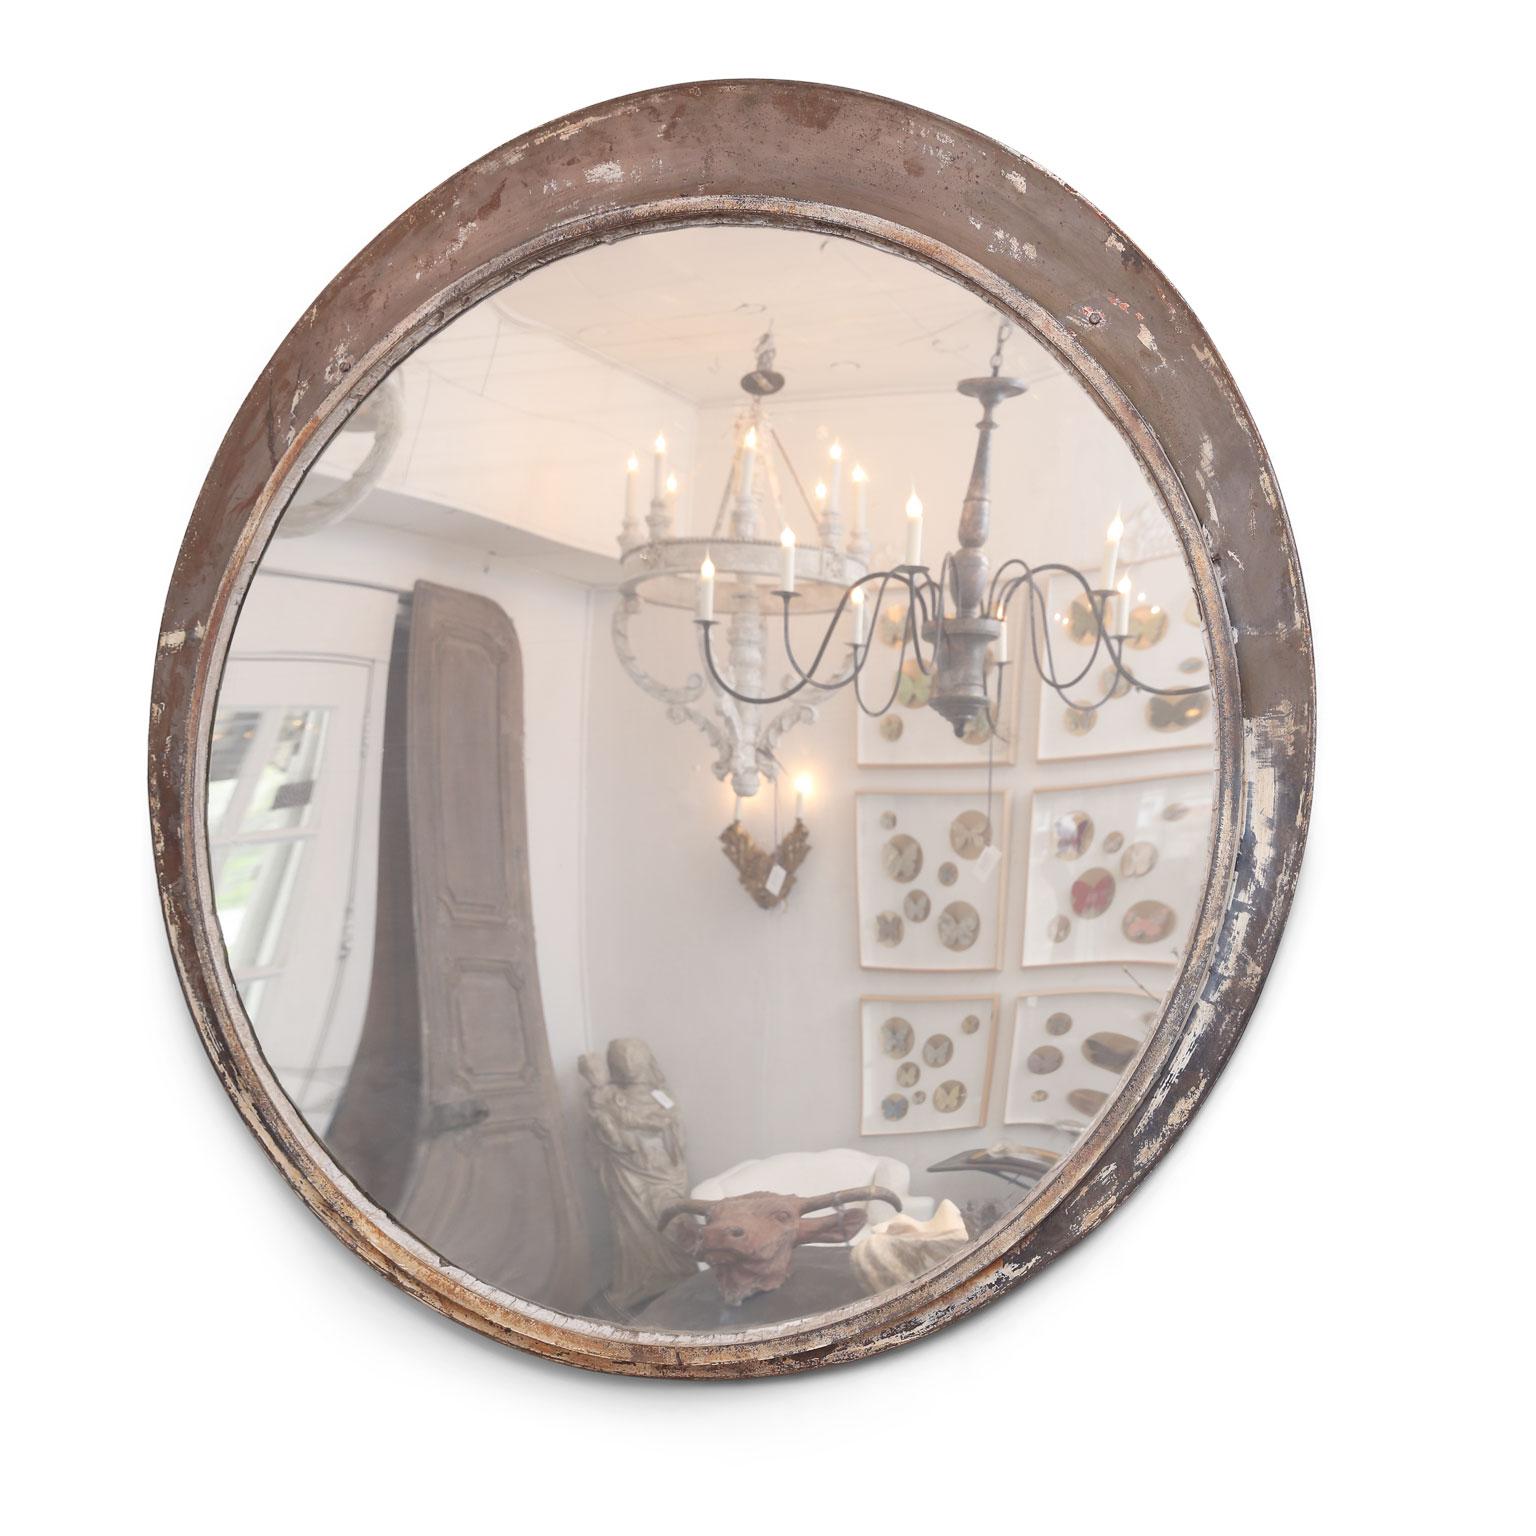 Large round train station mirror: early 20th century mirror in elliptical frame (used in a European train or subway station). Naturally worn old painted finish over steel. Slightly convex original mirror.